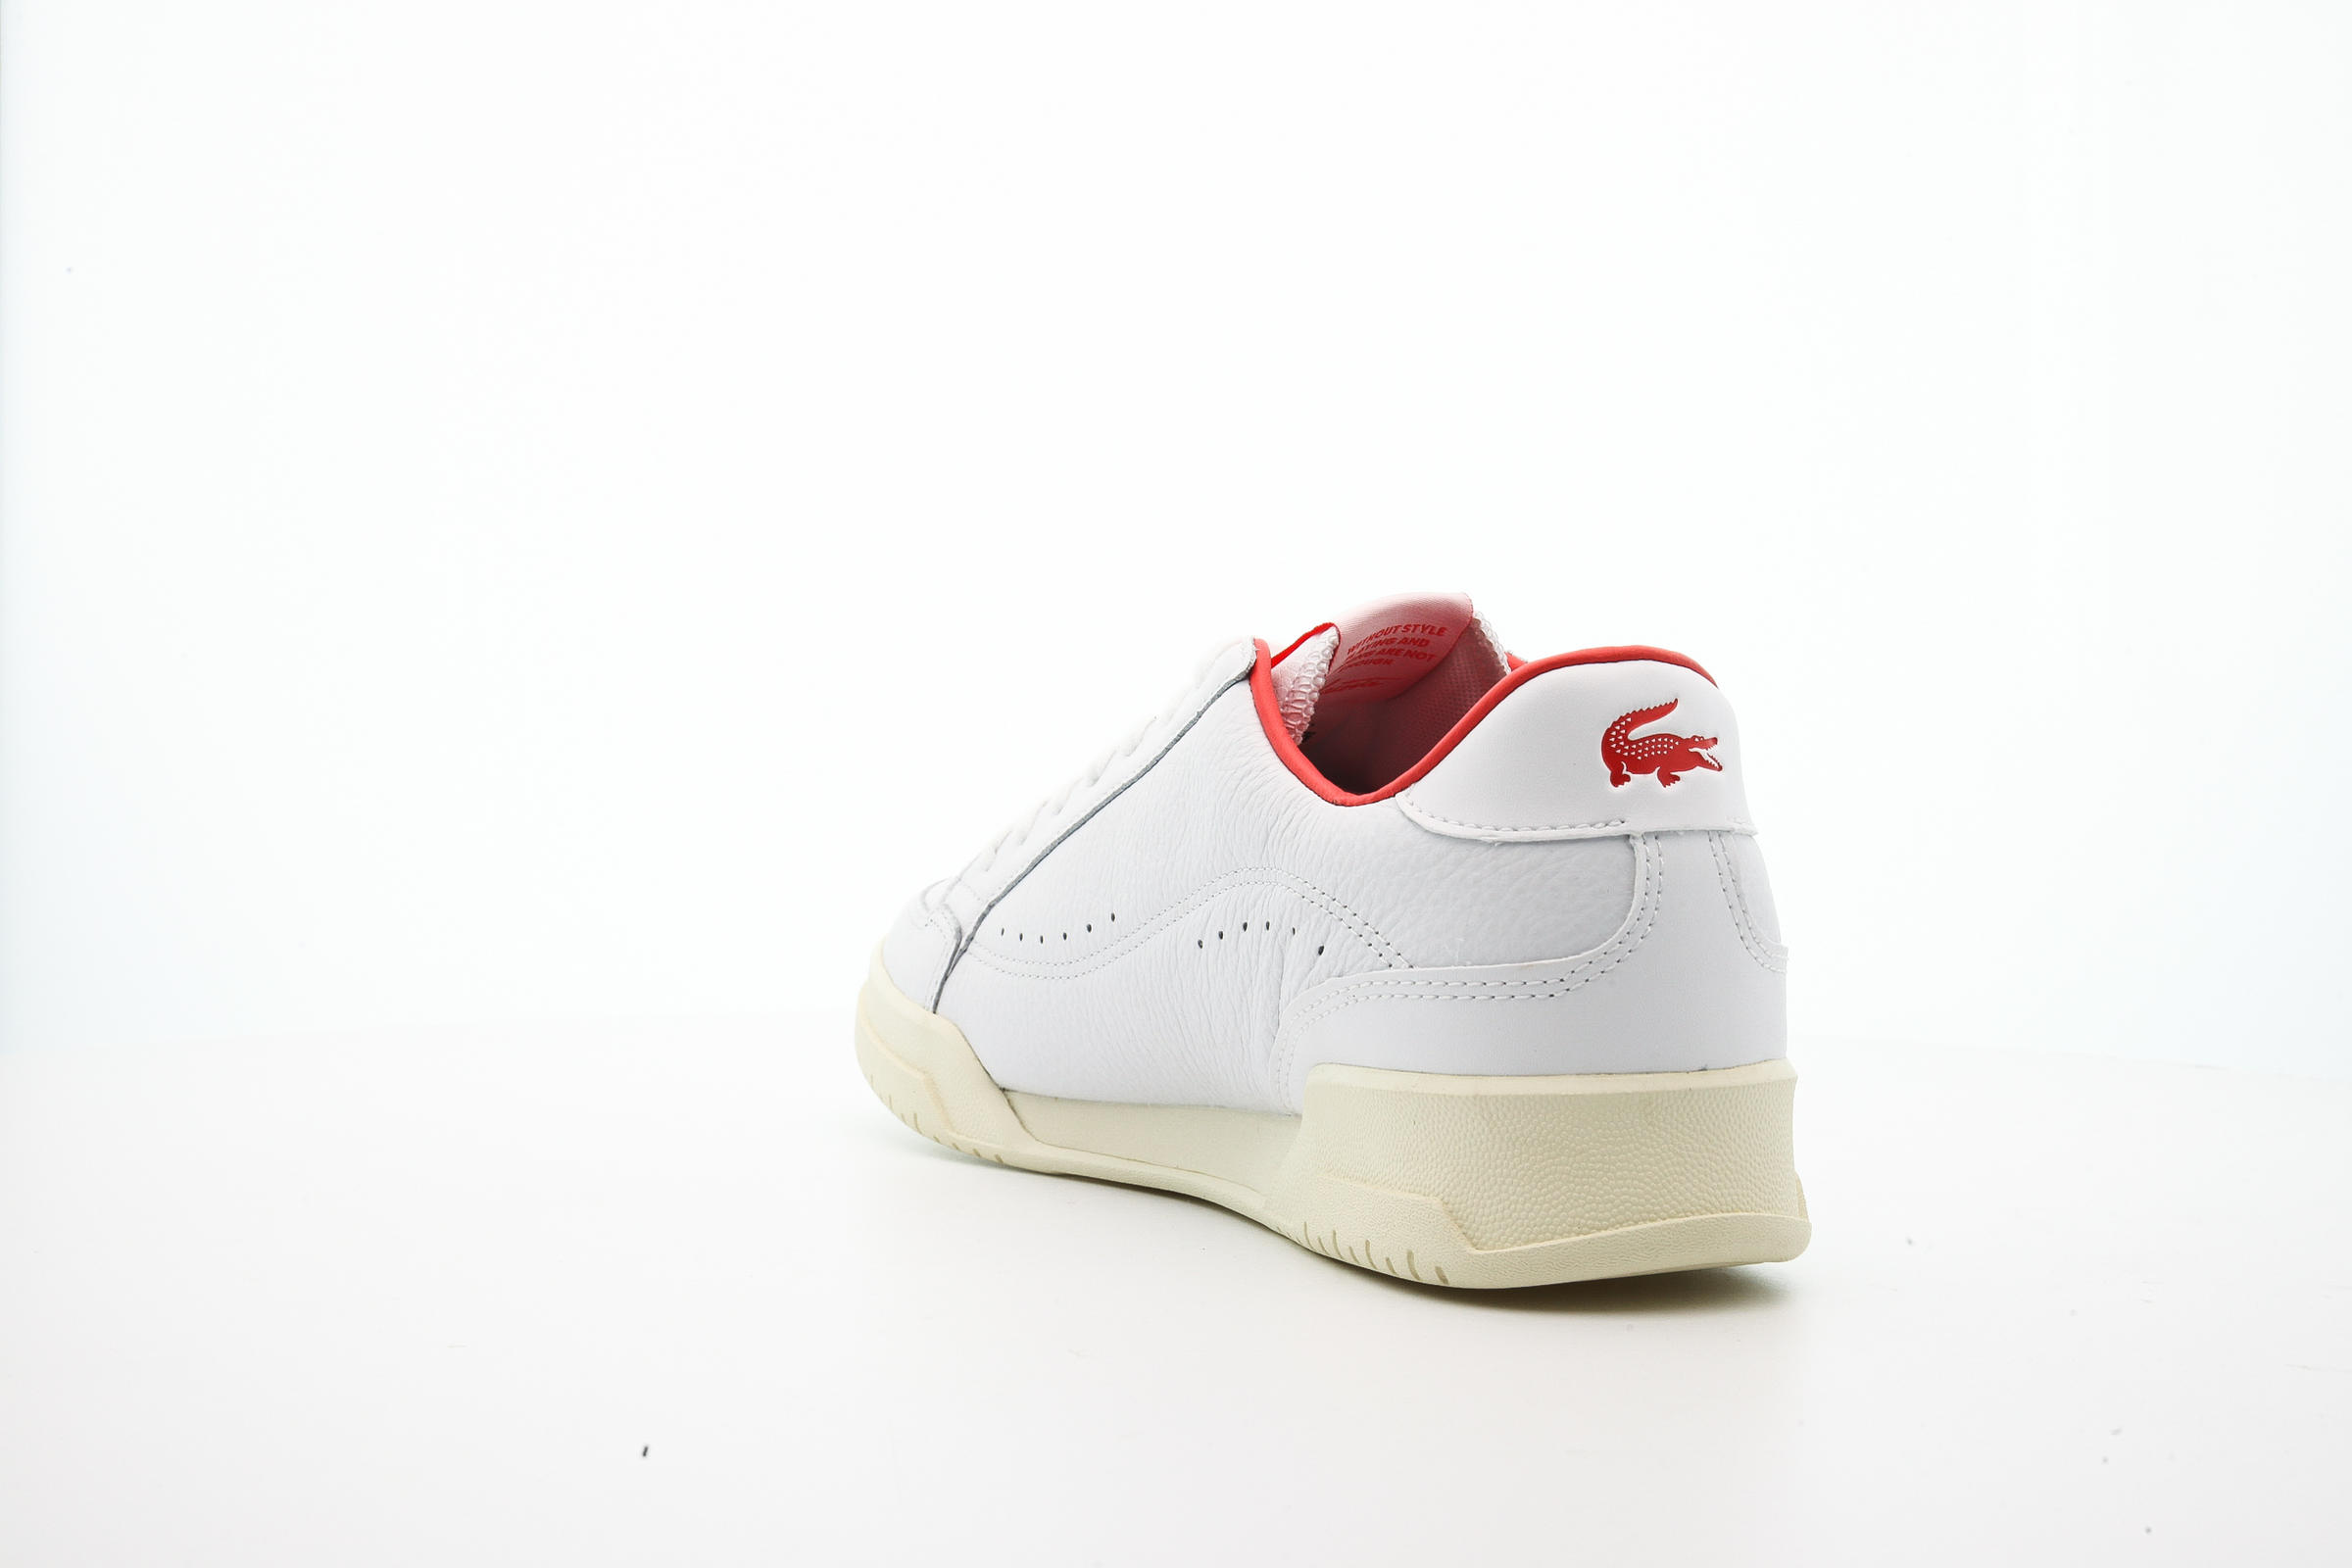 Lacoste TWIN SERVE LUXE "PINK"